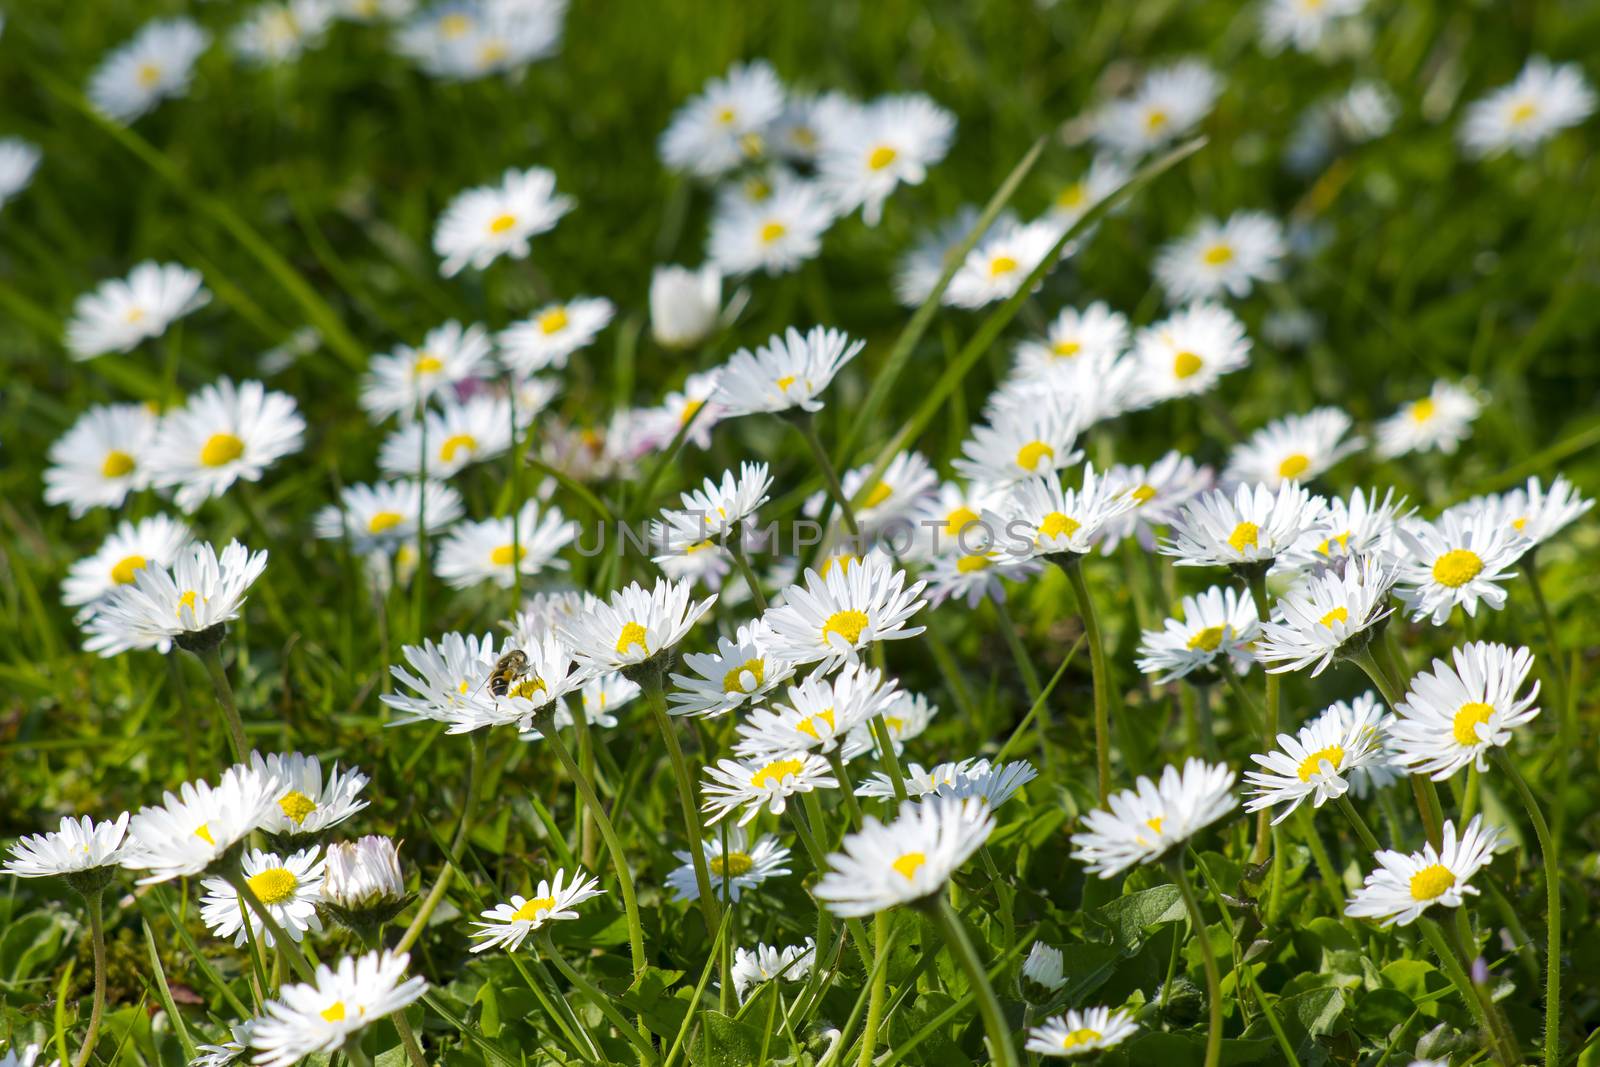 Background of blooming daisies by miradrozdowski